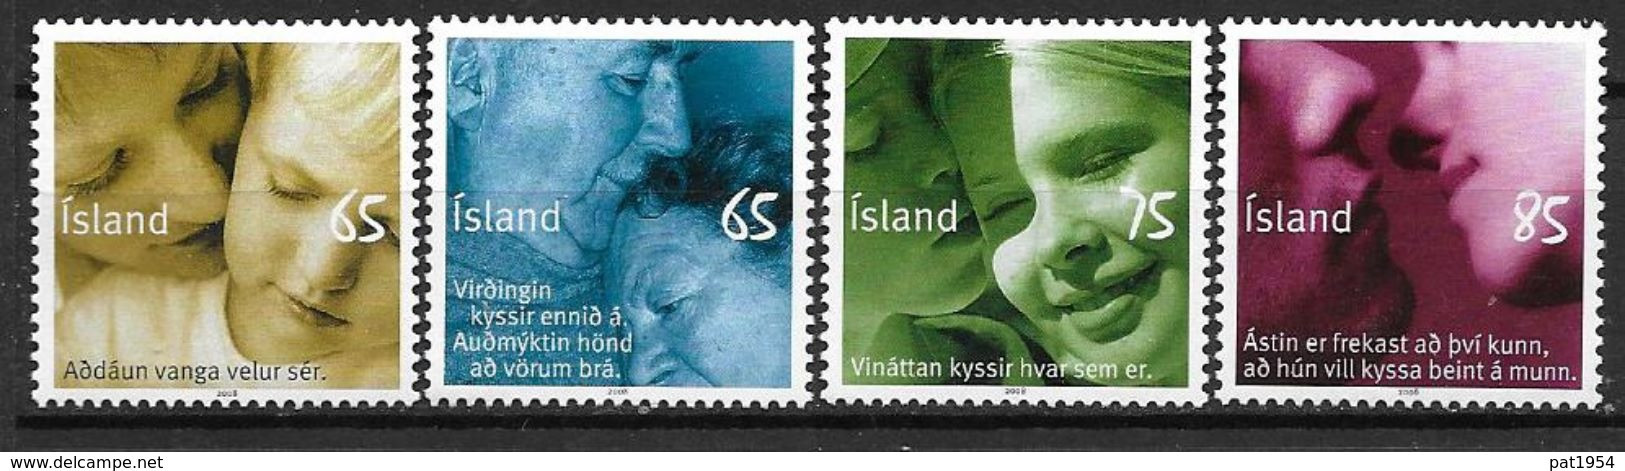 Islande 2008 N°1115/1118 Neufs** Timbres De Messages - Unused Stamps